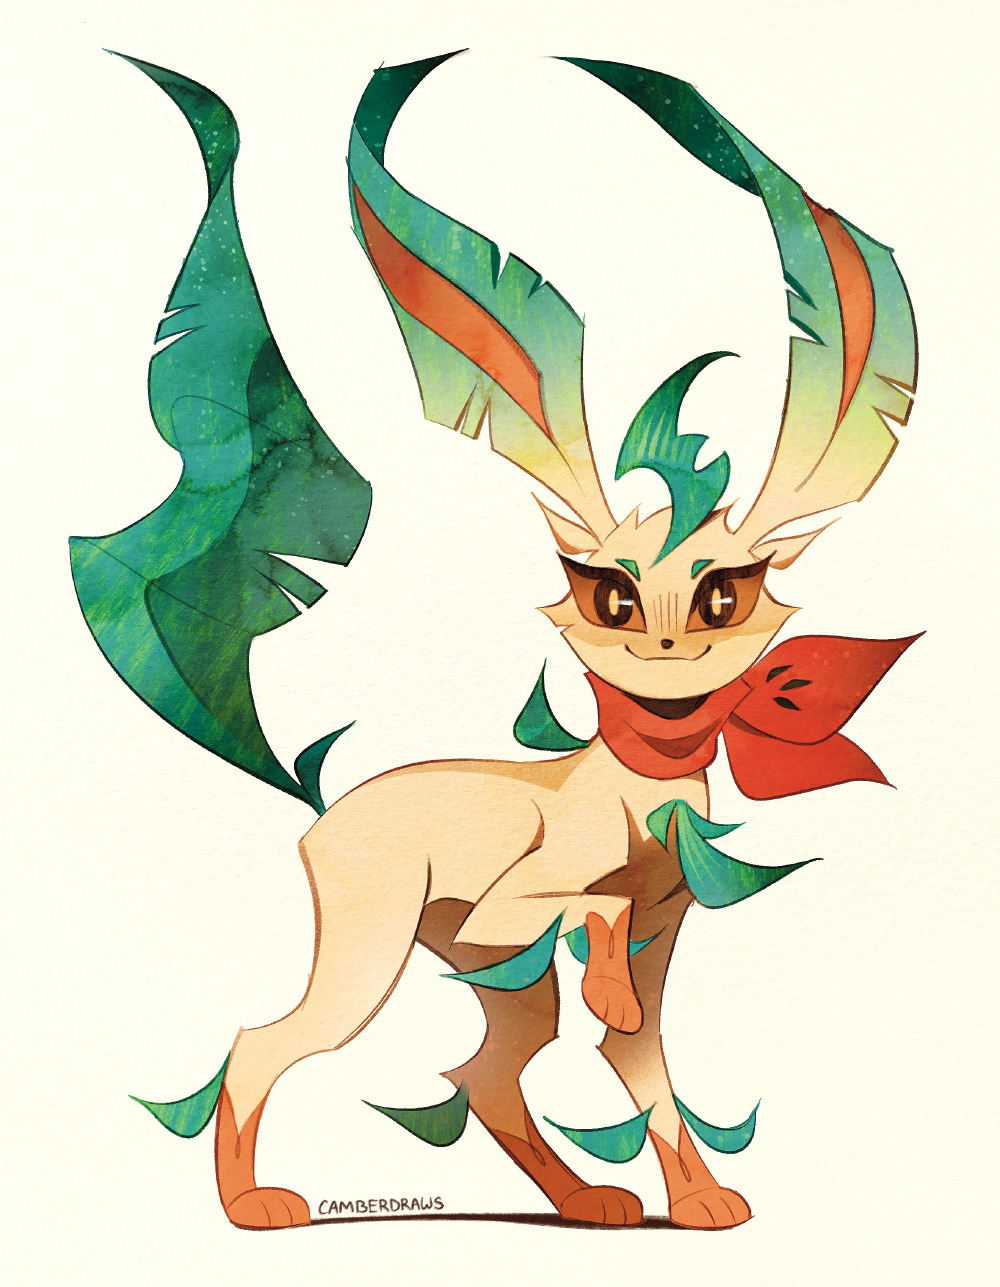 @picoffee designed me a WONDERFUL leafeon OC with a shaymin flower scarf! I had to draw them immediately!
I’m currently headcanoning them as a botanist in the PMD universe :)